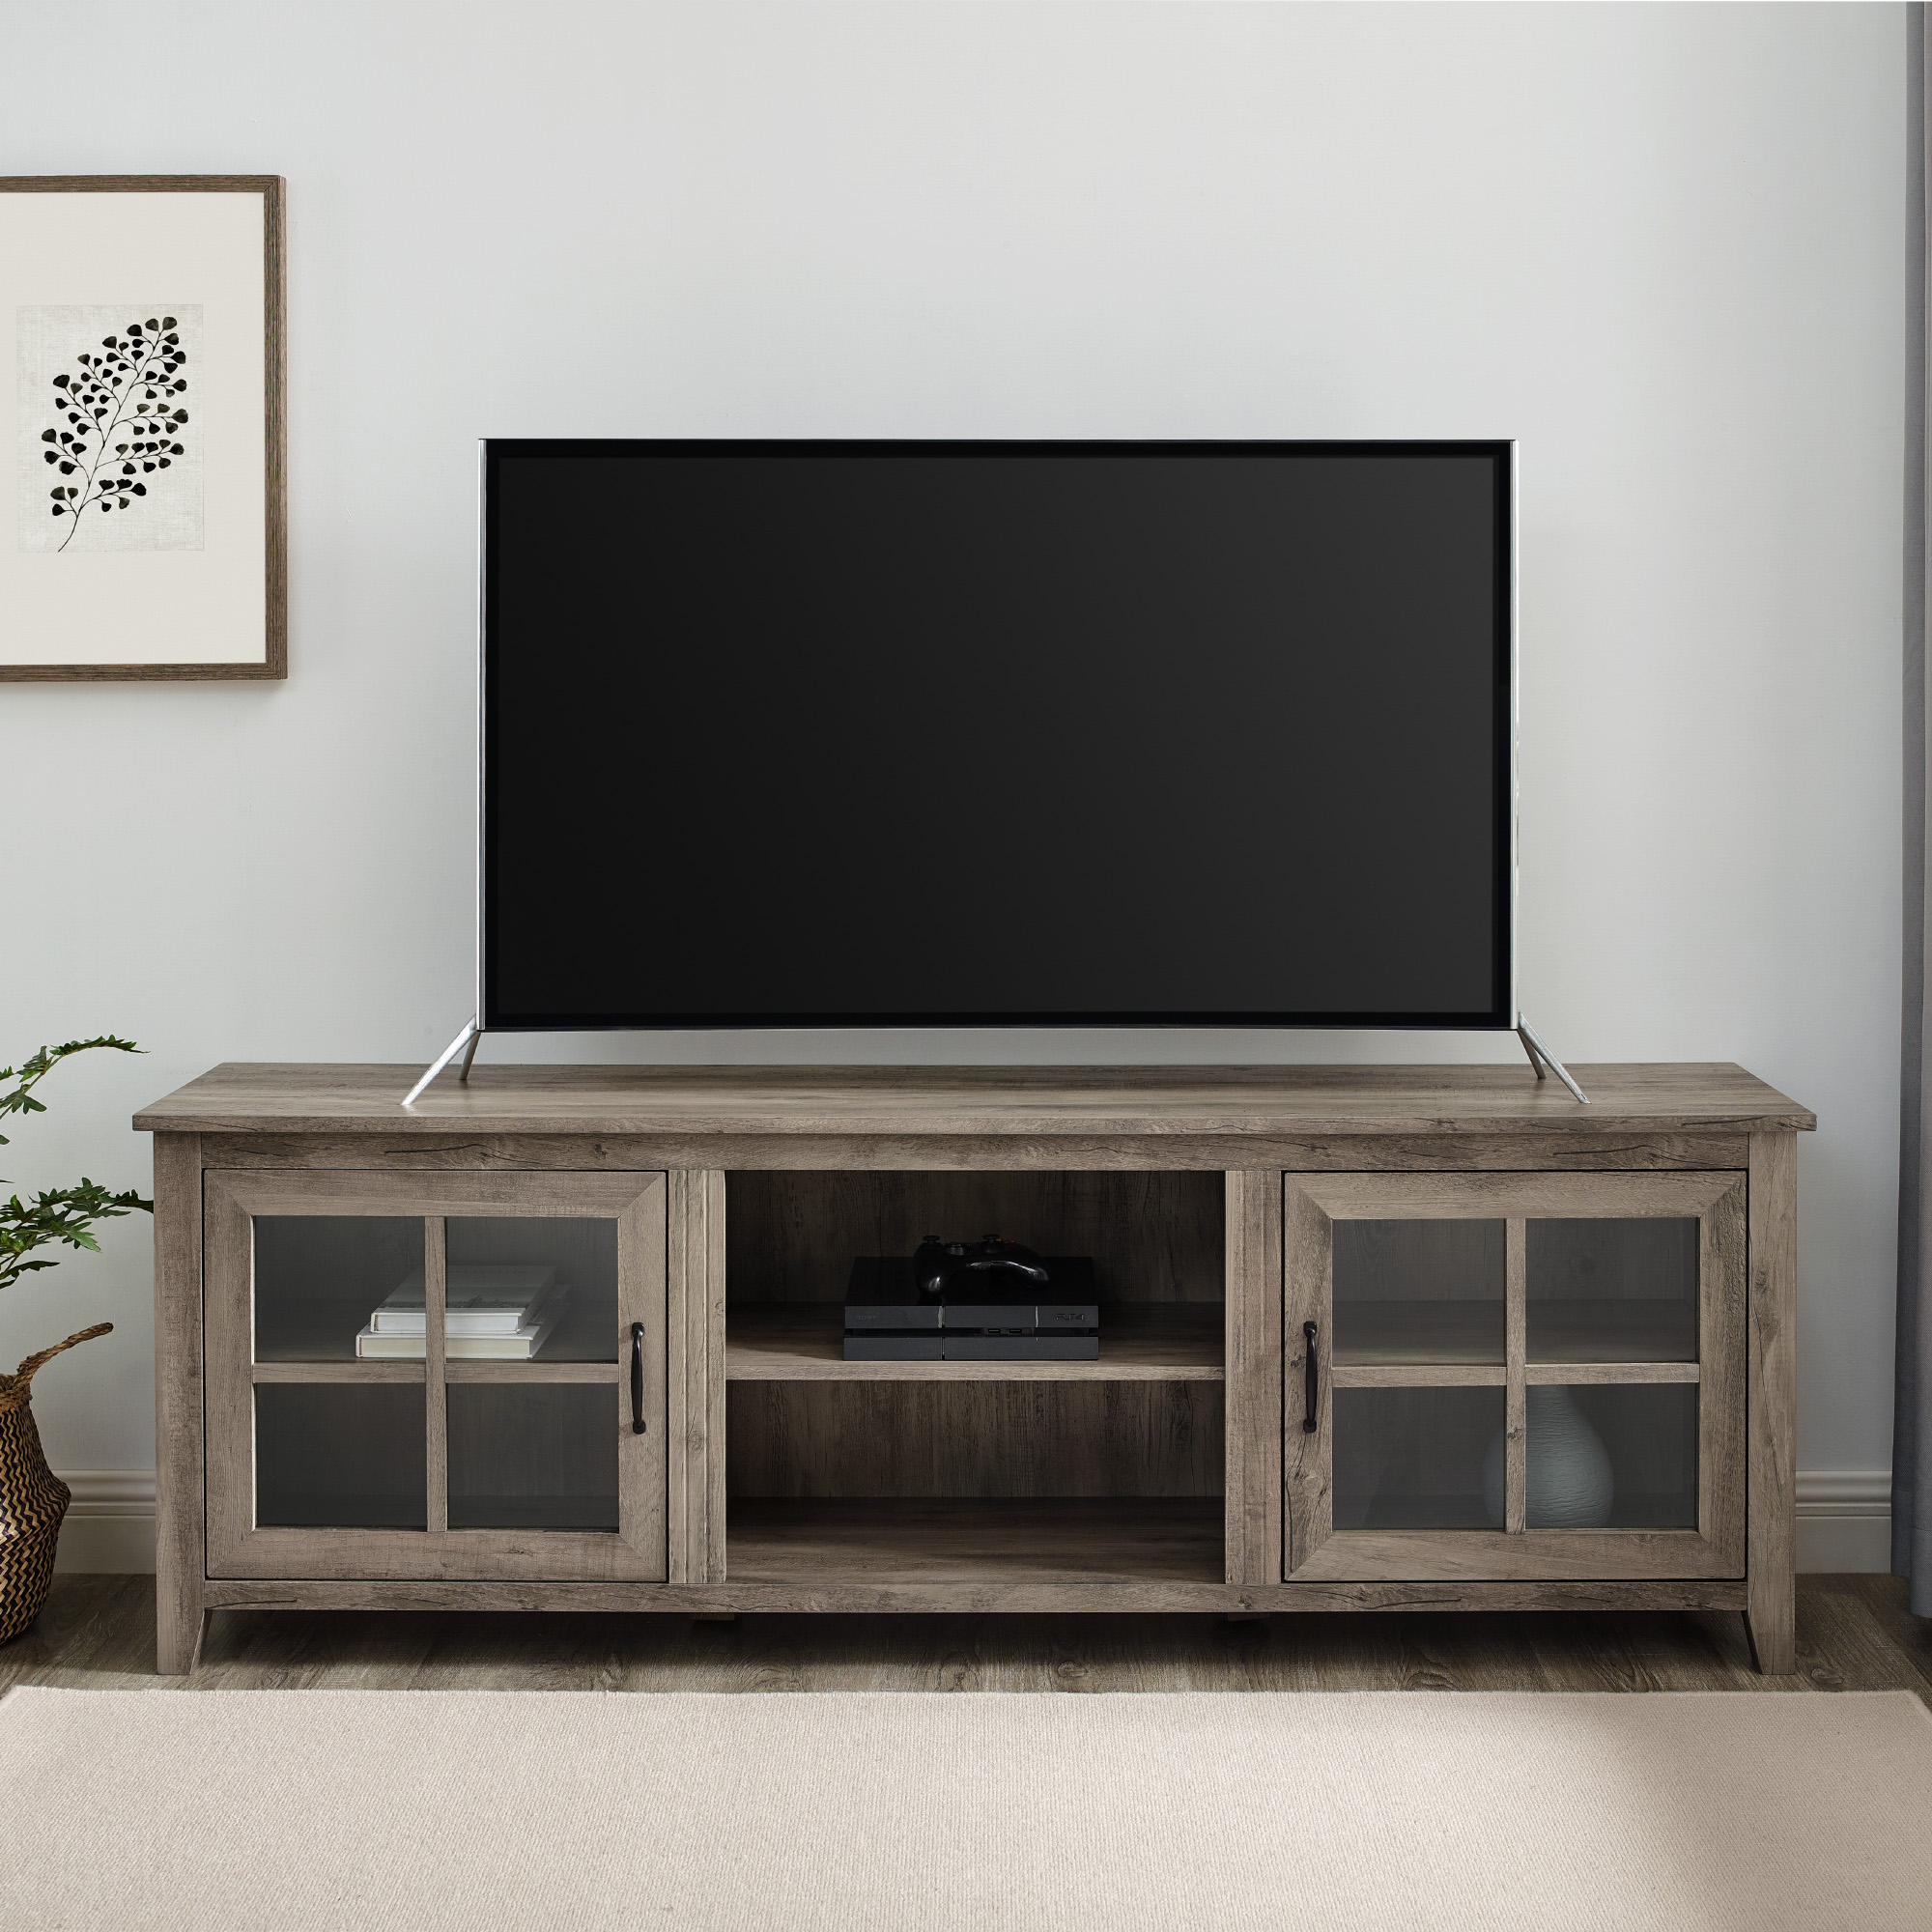 Walker Edison Modern Farmhouse TV Stand for TVs up to 80", Grey Wash - image 3 of 14